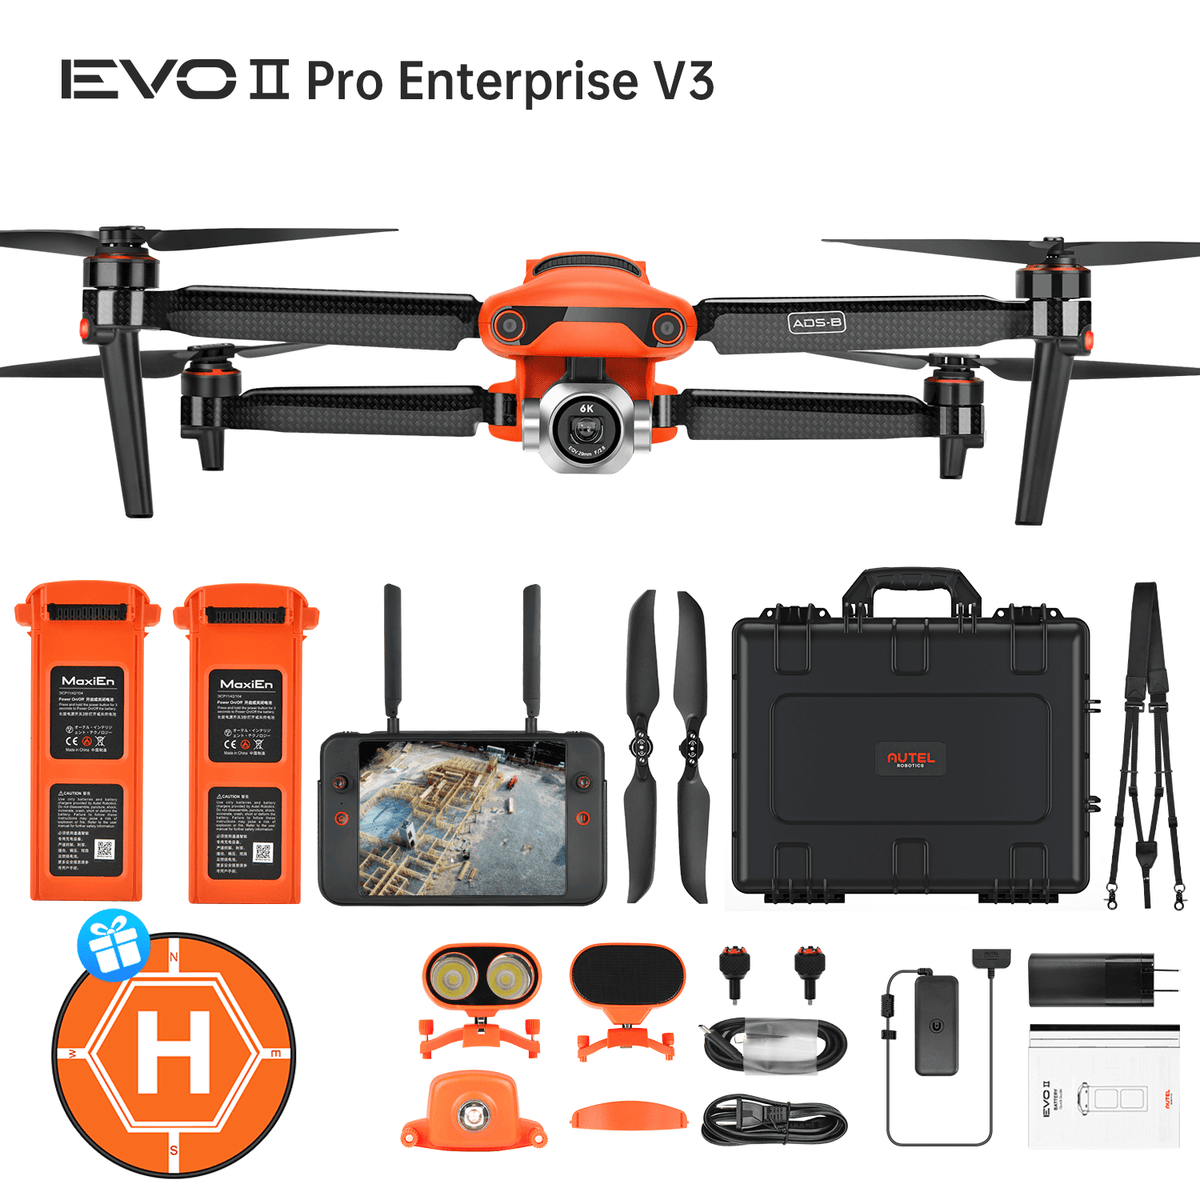  Mini 3 Pro Drone with RC Remote Controller, Bundle with 128GB  UHS-I Memory Card, Anti-Collision Strobe Light, and 20 Foldable Landing  Pad pro, Accessories Kit : Toys & Games